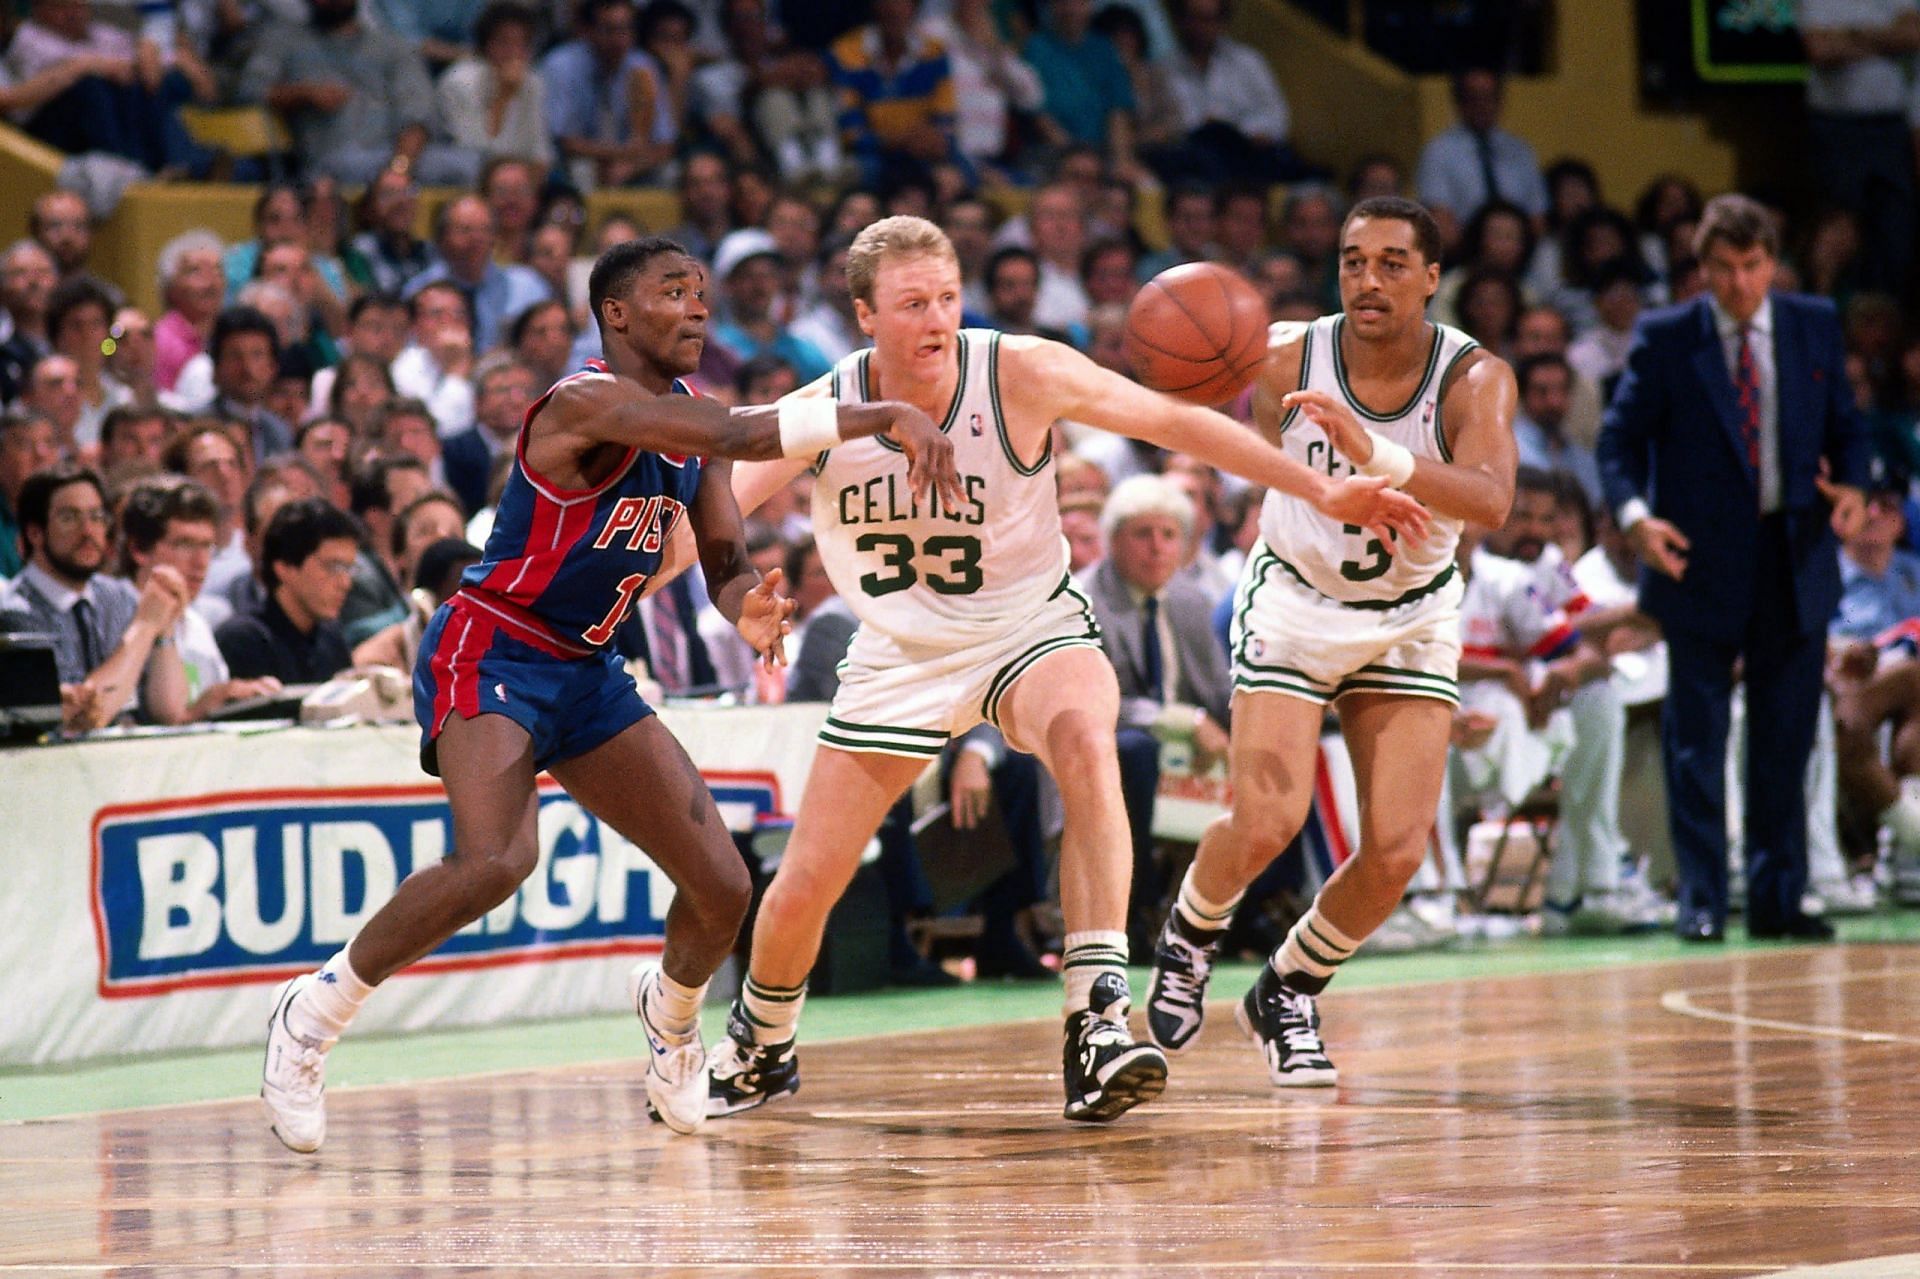 Larry Bird caused Isiah Thomas and the Detroit Pistons several of their most painful playoff defeats. [Hoops Habit]